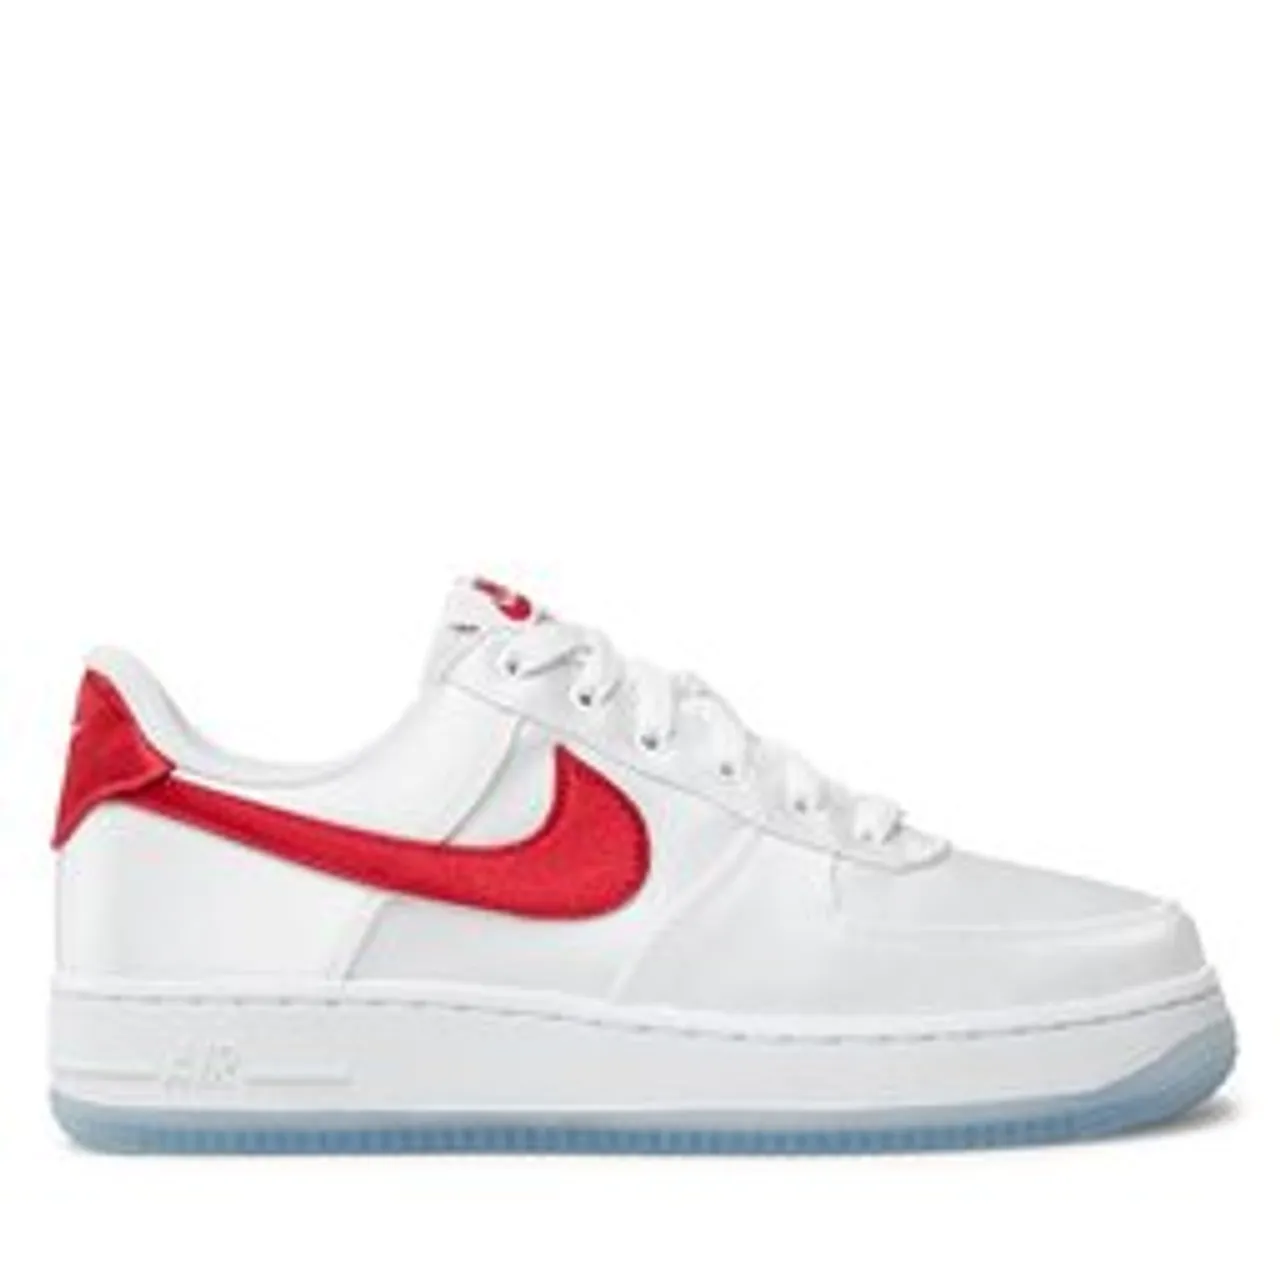 Schuhe Nike Air Force 1 '07 Ess Snkr DX6541 100 White/Arsity Red